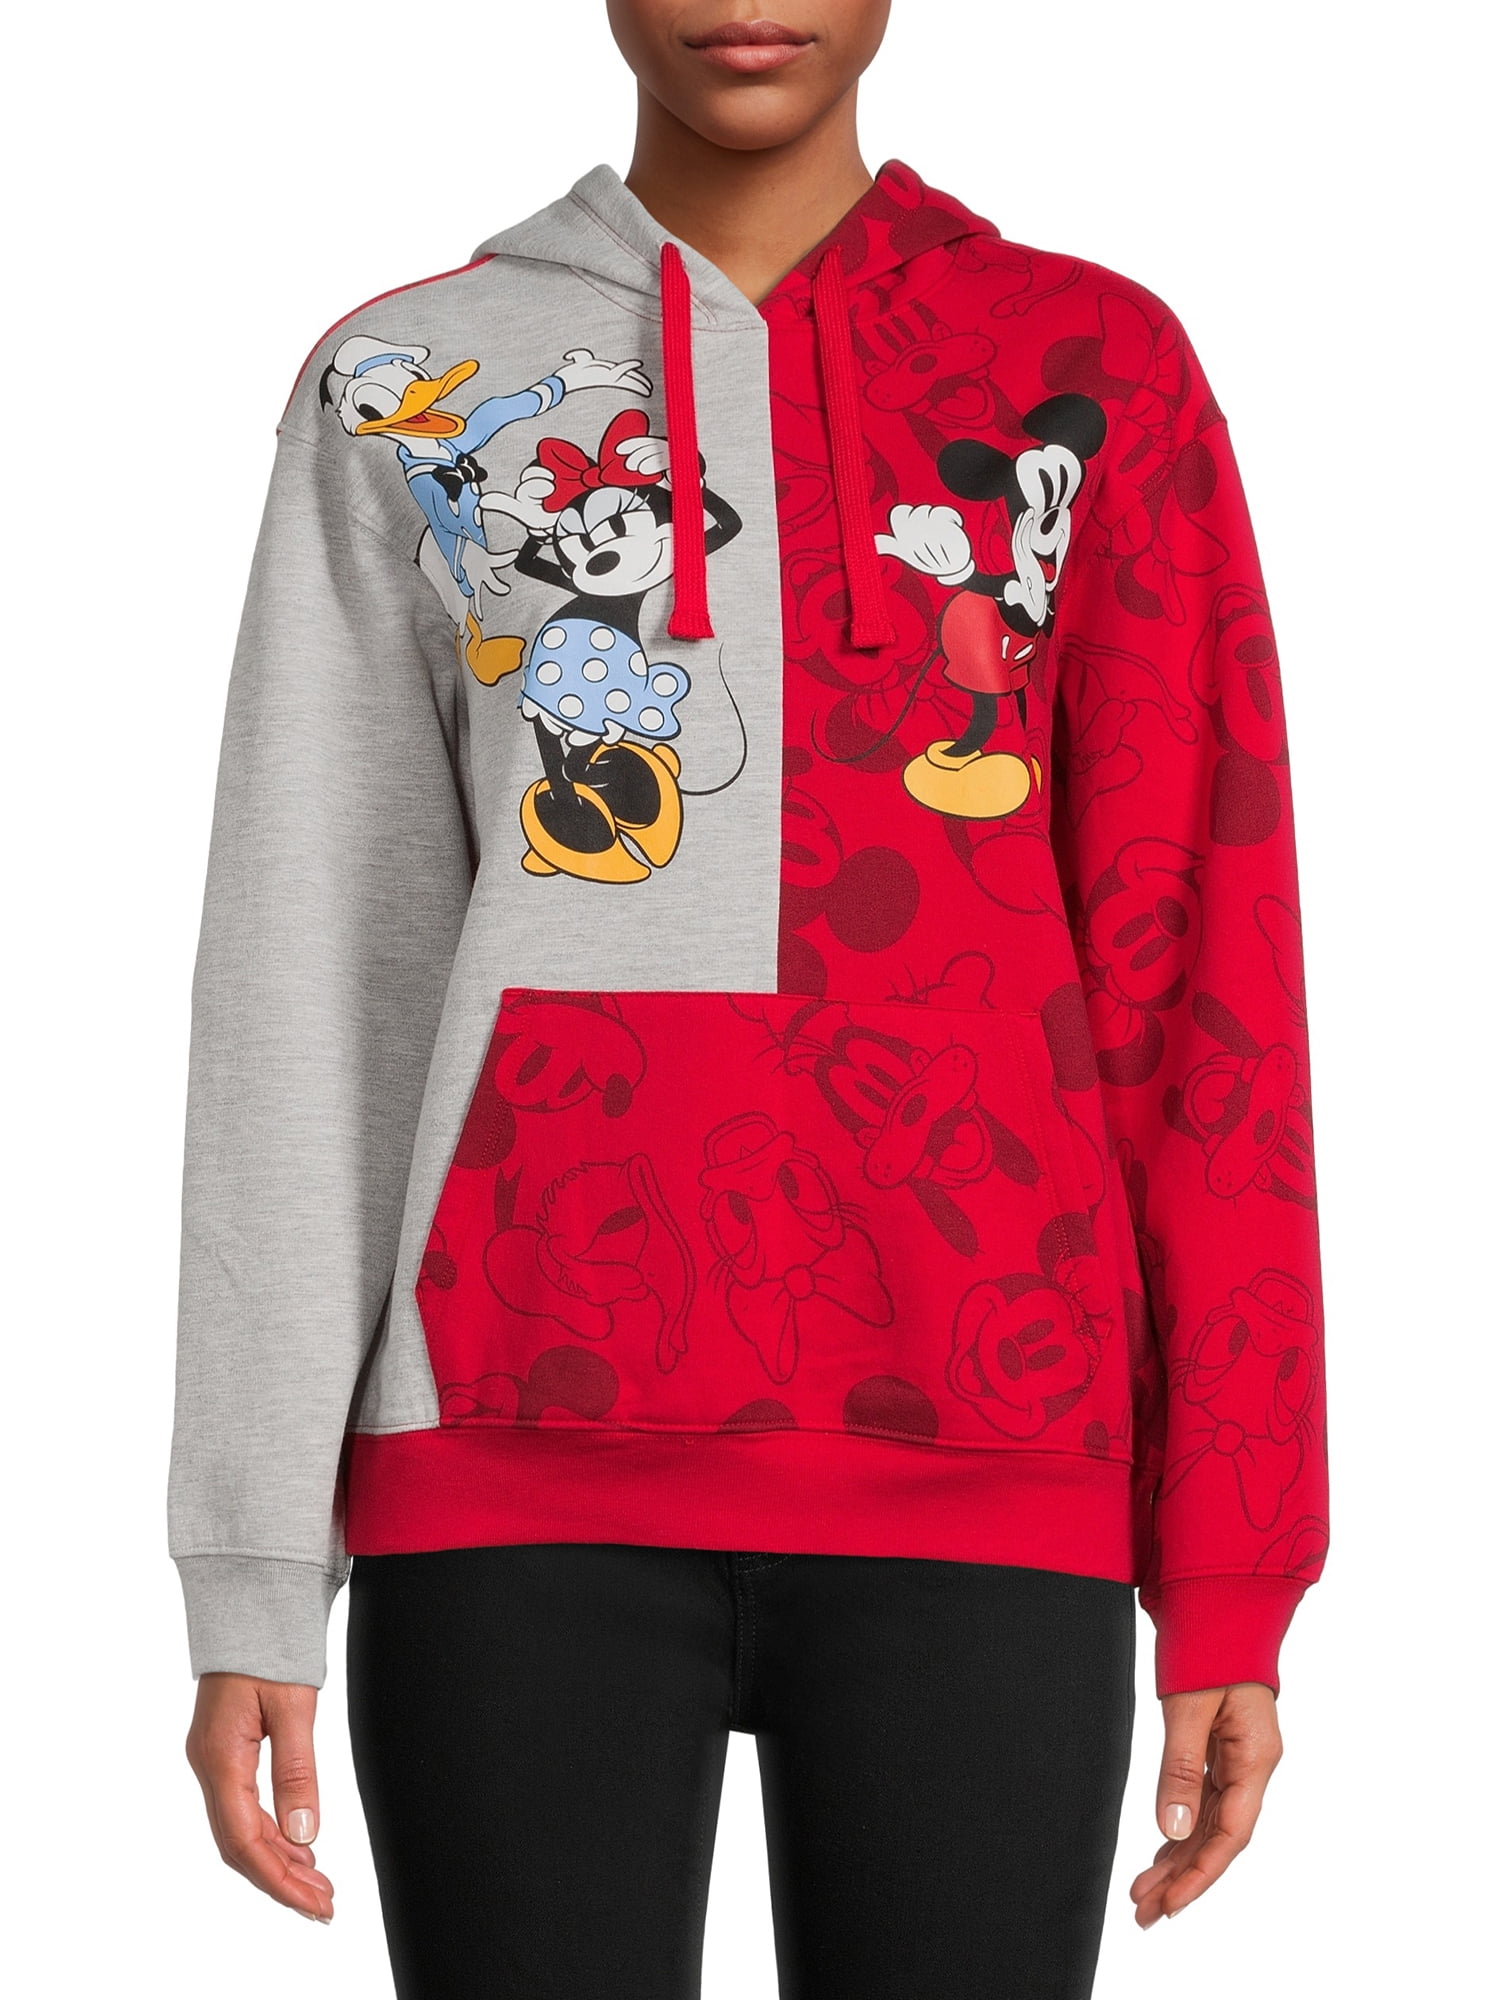 Disney's Mickey Mouse and Friends Women's Graphic Fleece Hoodie -  